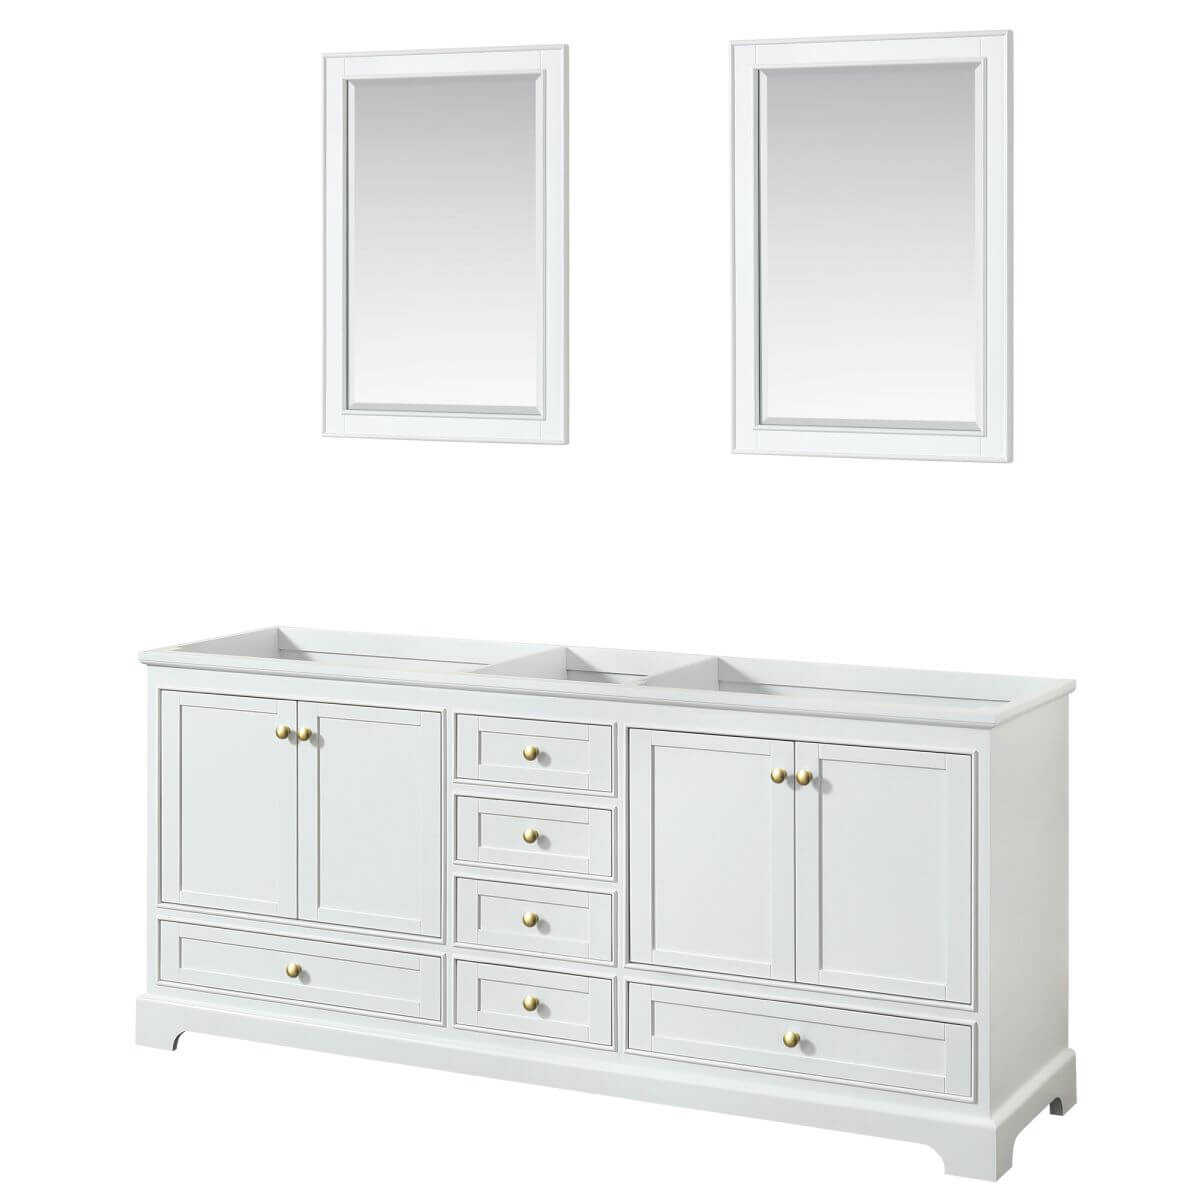 Wyndham Collection Deborah 80 inch Double Bathroom Vanity in White with 24 inch Mirrors, Brushed Gold Trim, No Countertop and No Sinks - WCS202080DWGCXSXXM24